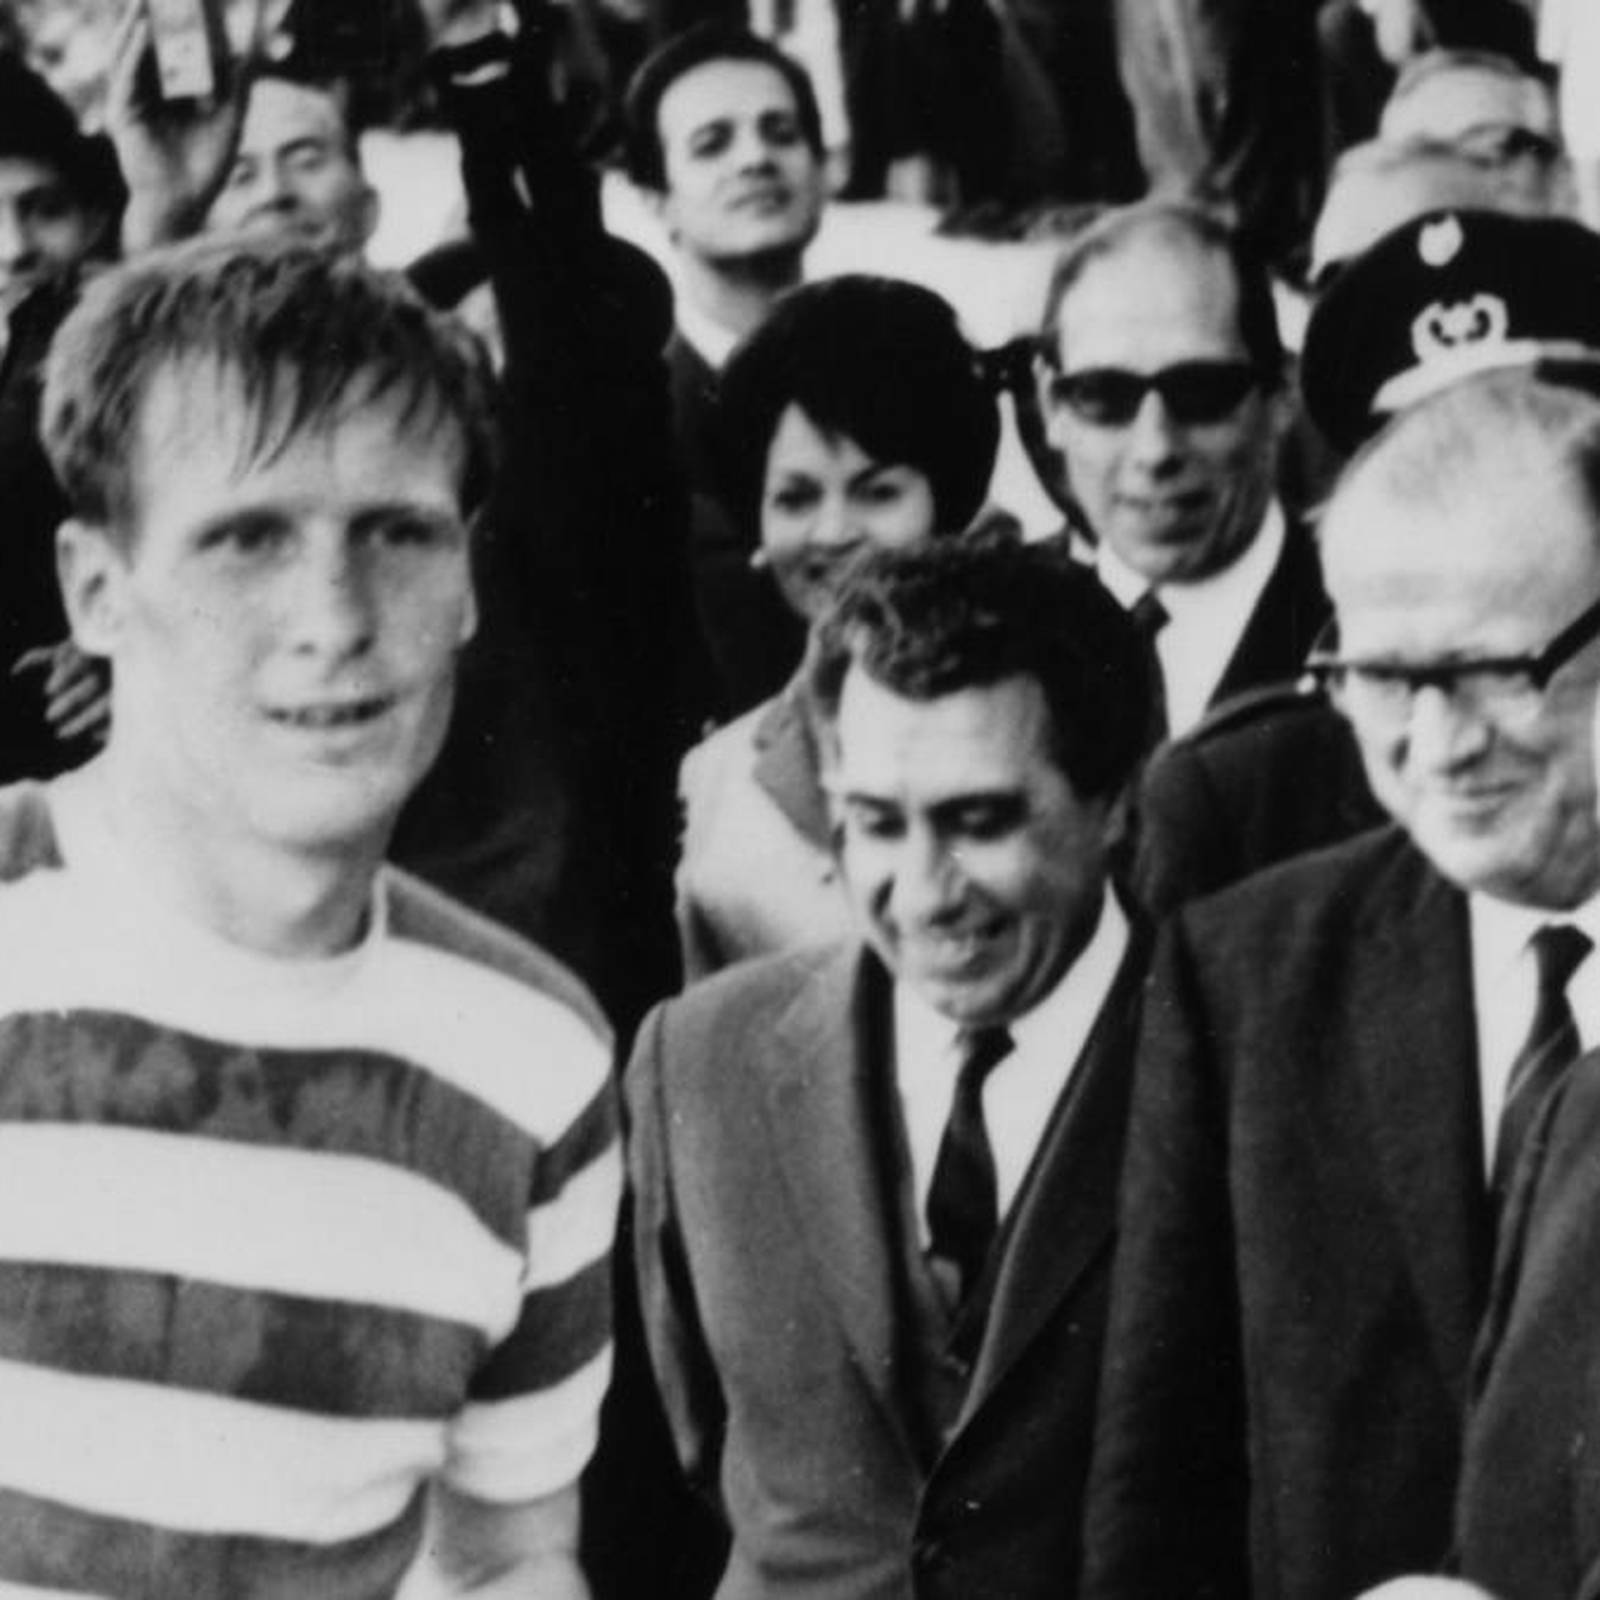 The Sporting Blog on X: Celtic's Lisbon Lions The School of Football  brings you the short story of the 1967 Celtic FC side that won the 1967  European Cup.  #Celtic #LisbonLions #